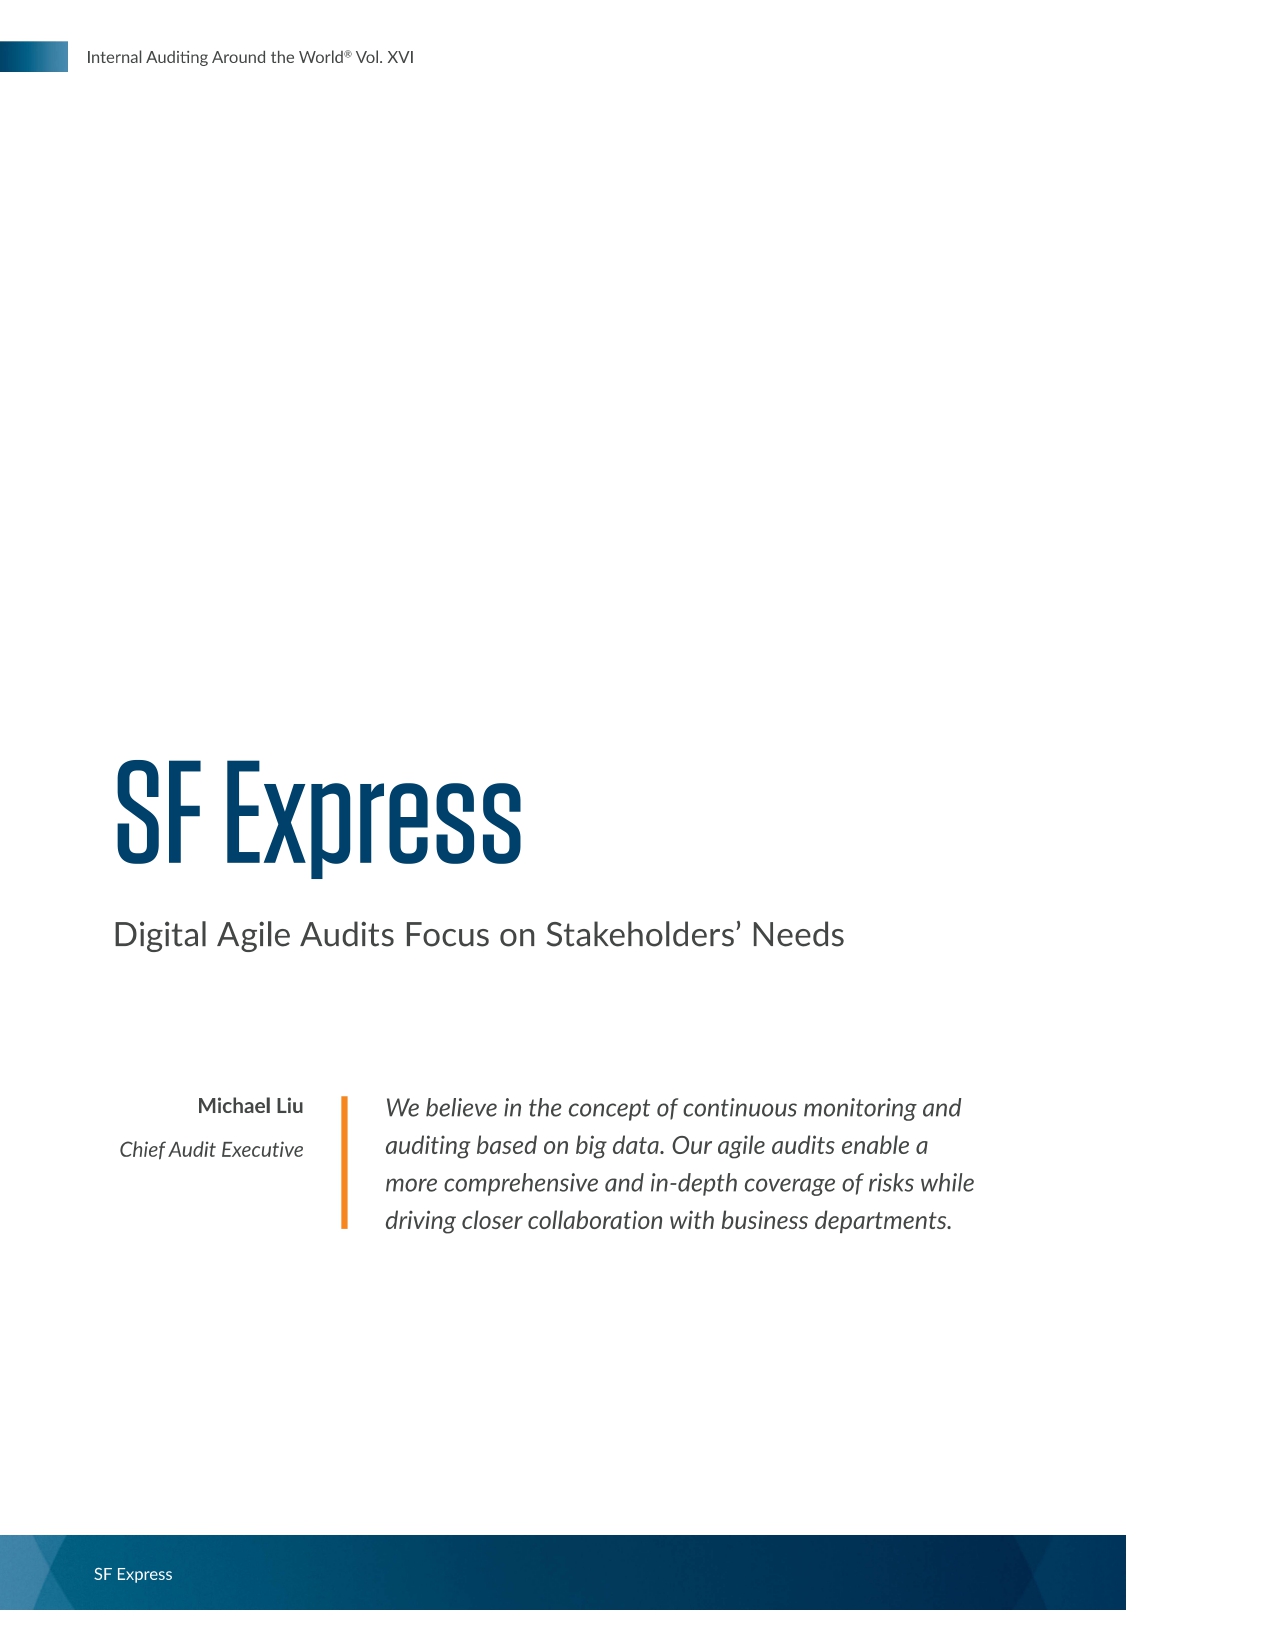 Screenshot of the first page of IAAroundWorld16 Protiviti SF Express